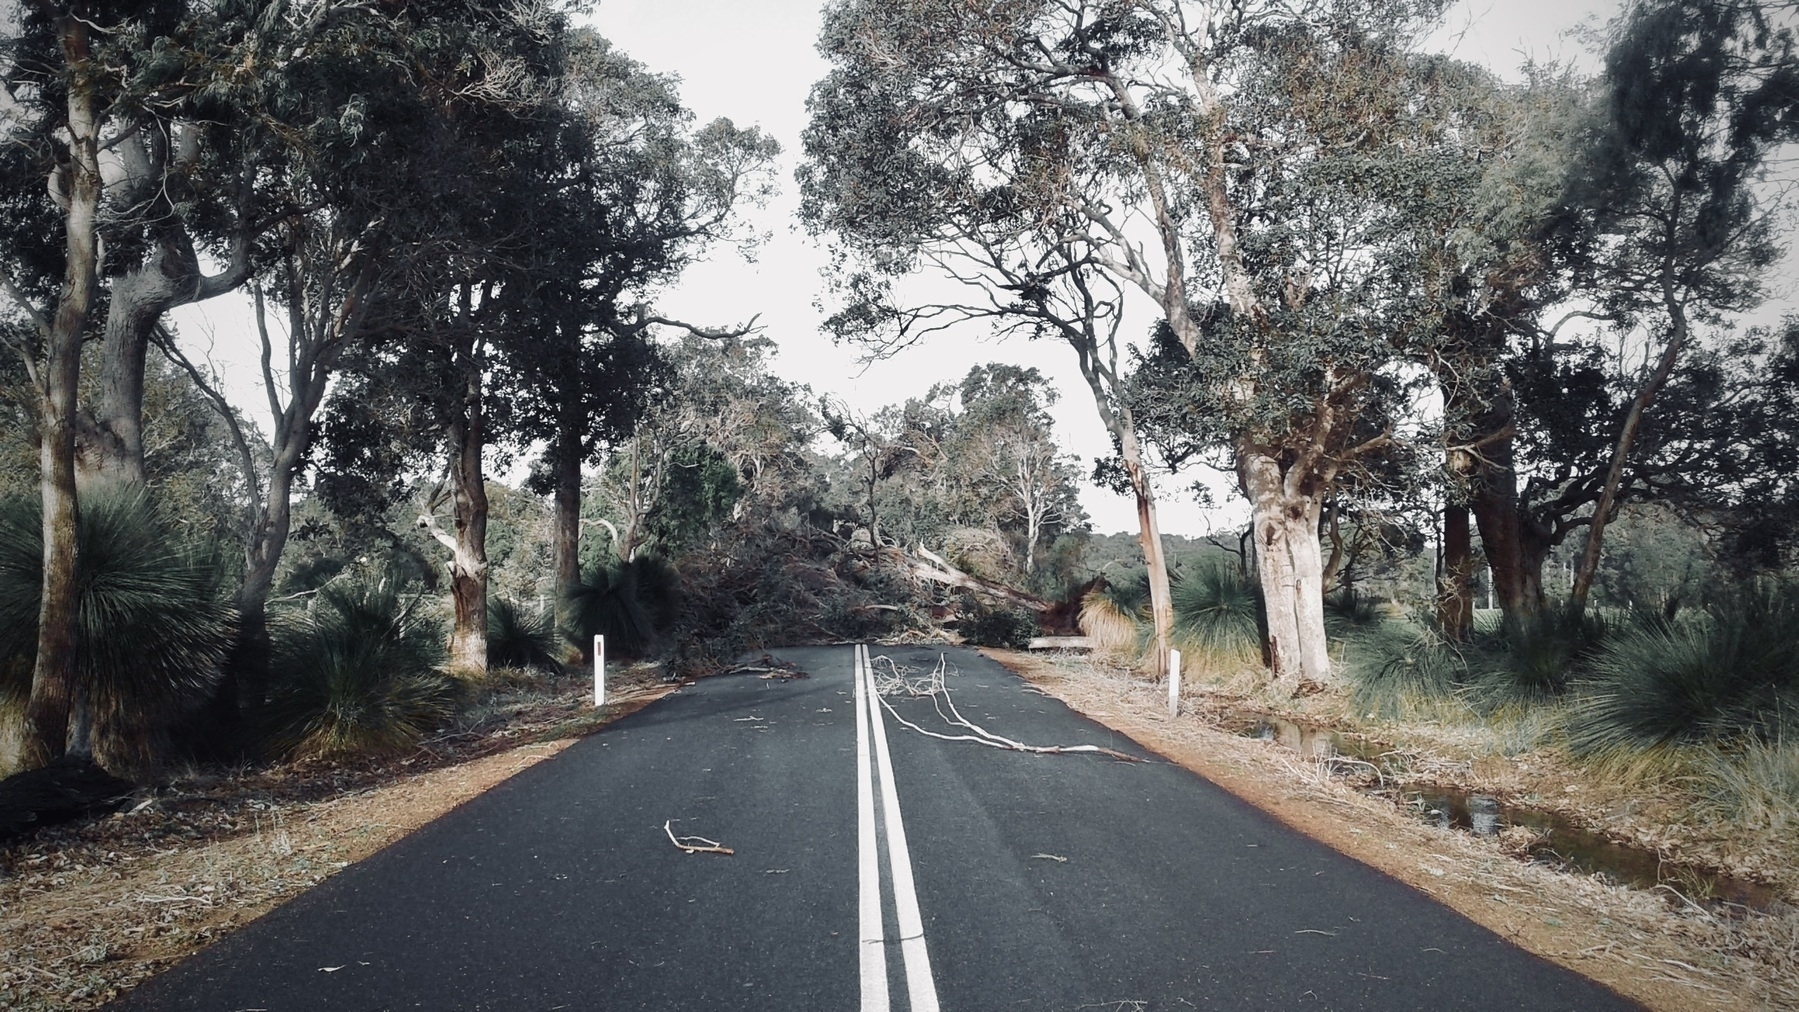 A eucalypt tree lies broken across an outback road, the black bitumen and double white lines disappearing into the branches strewn about. Dirt, native grass trees, and dry eucalypts line the road.